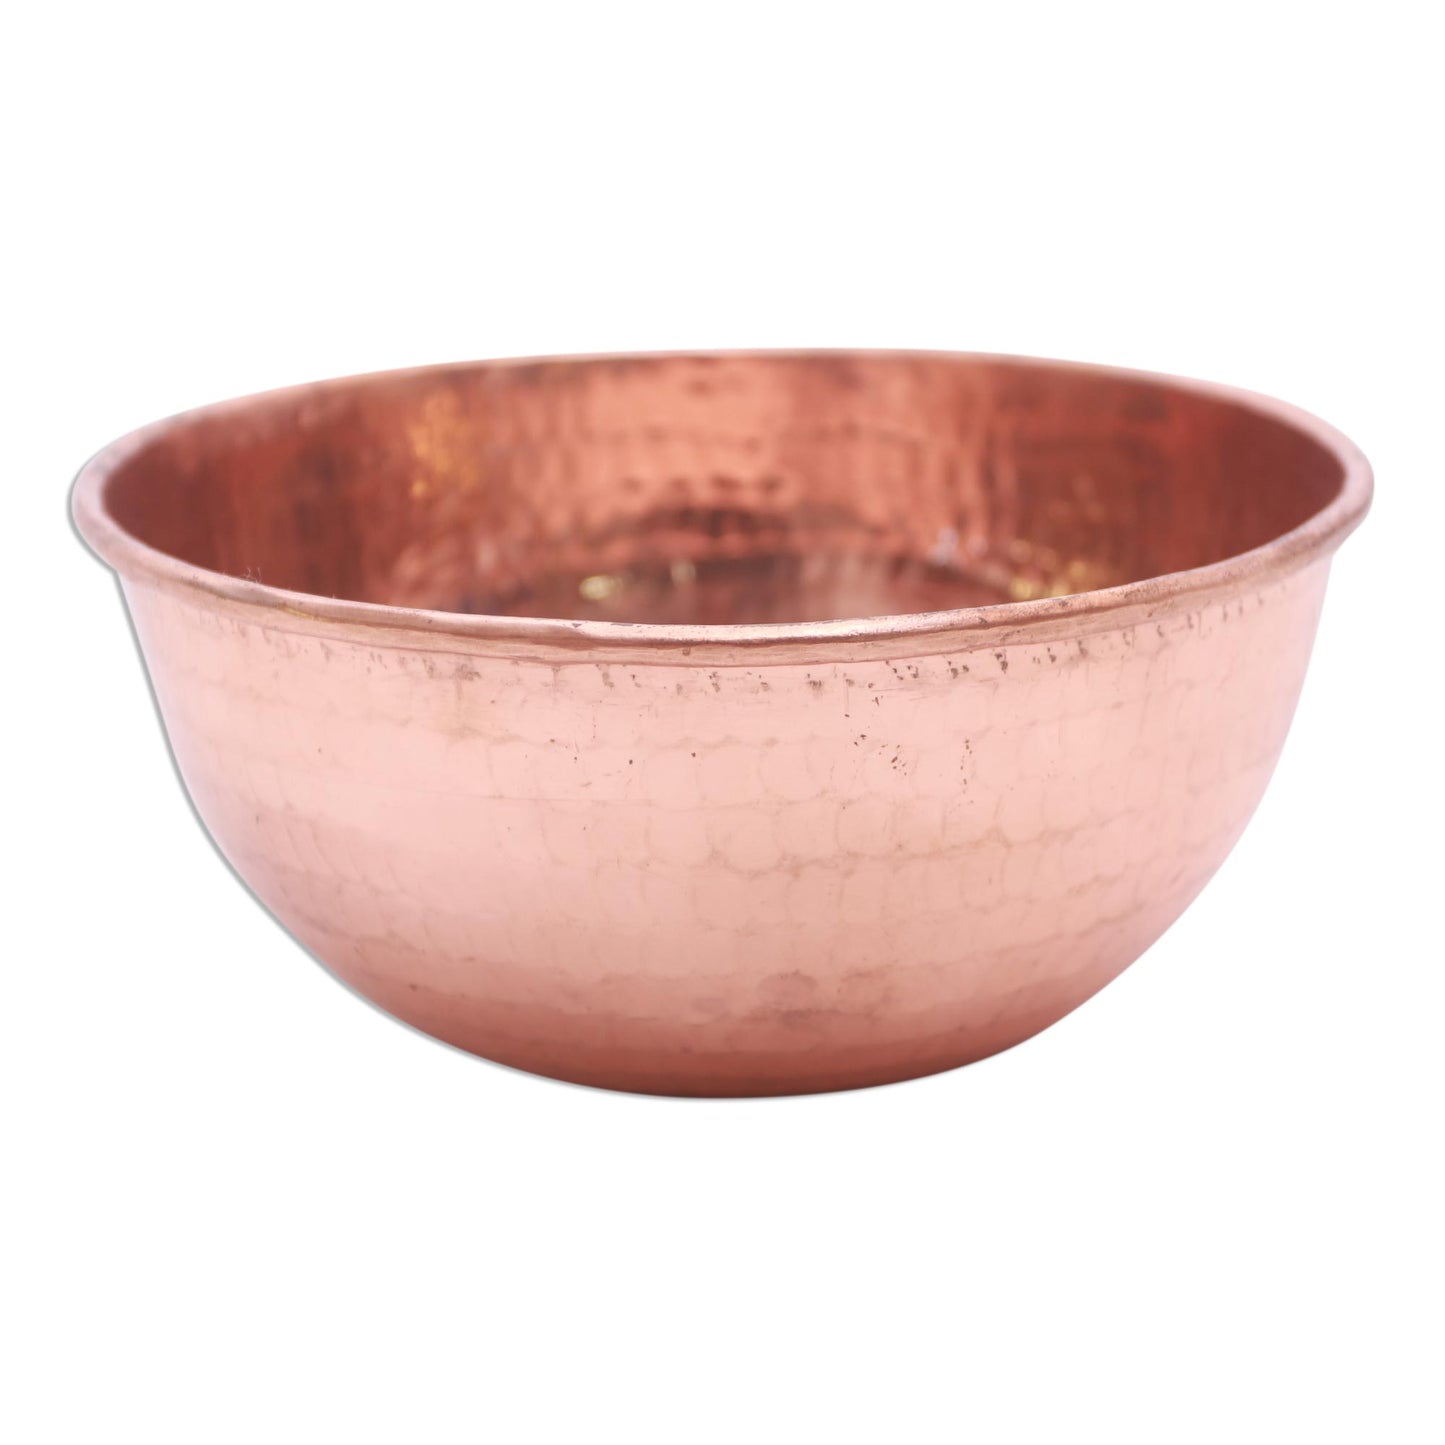 Gleaming Meal Hammered Copper Bowl Handcrafted in Bali